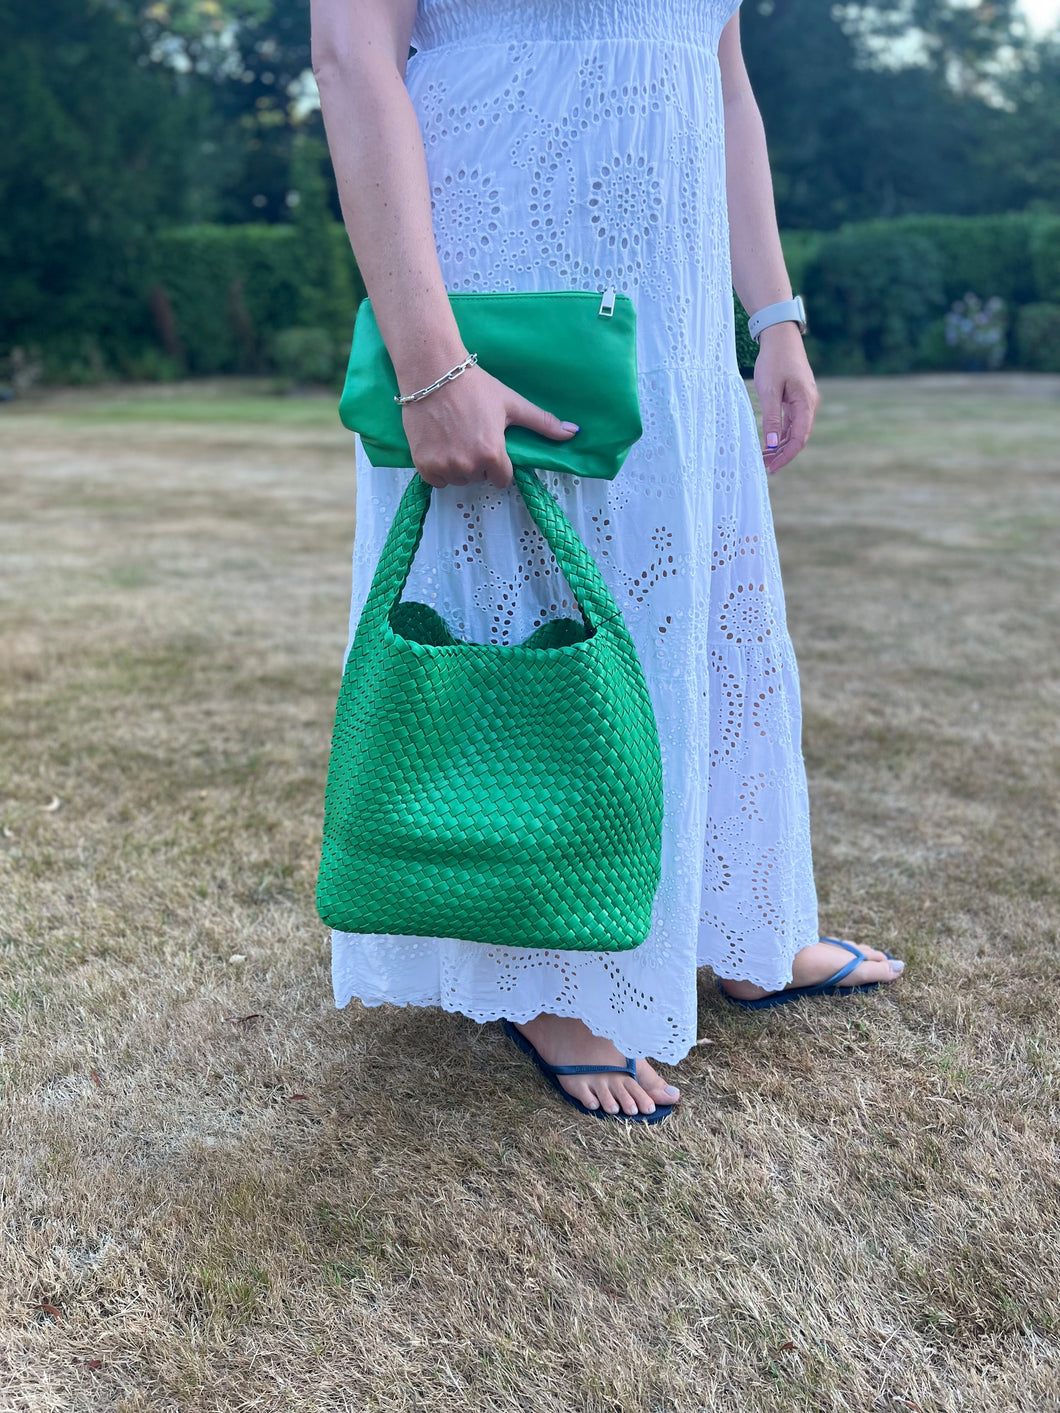 Hand Knitted Leather Tote Bag